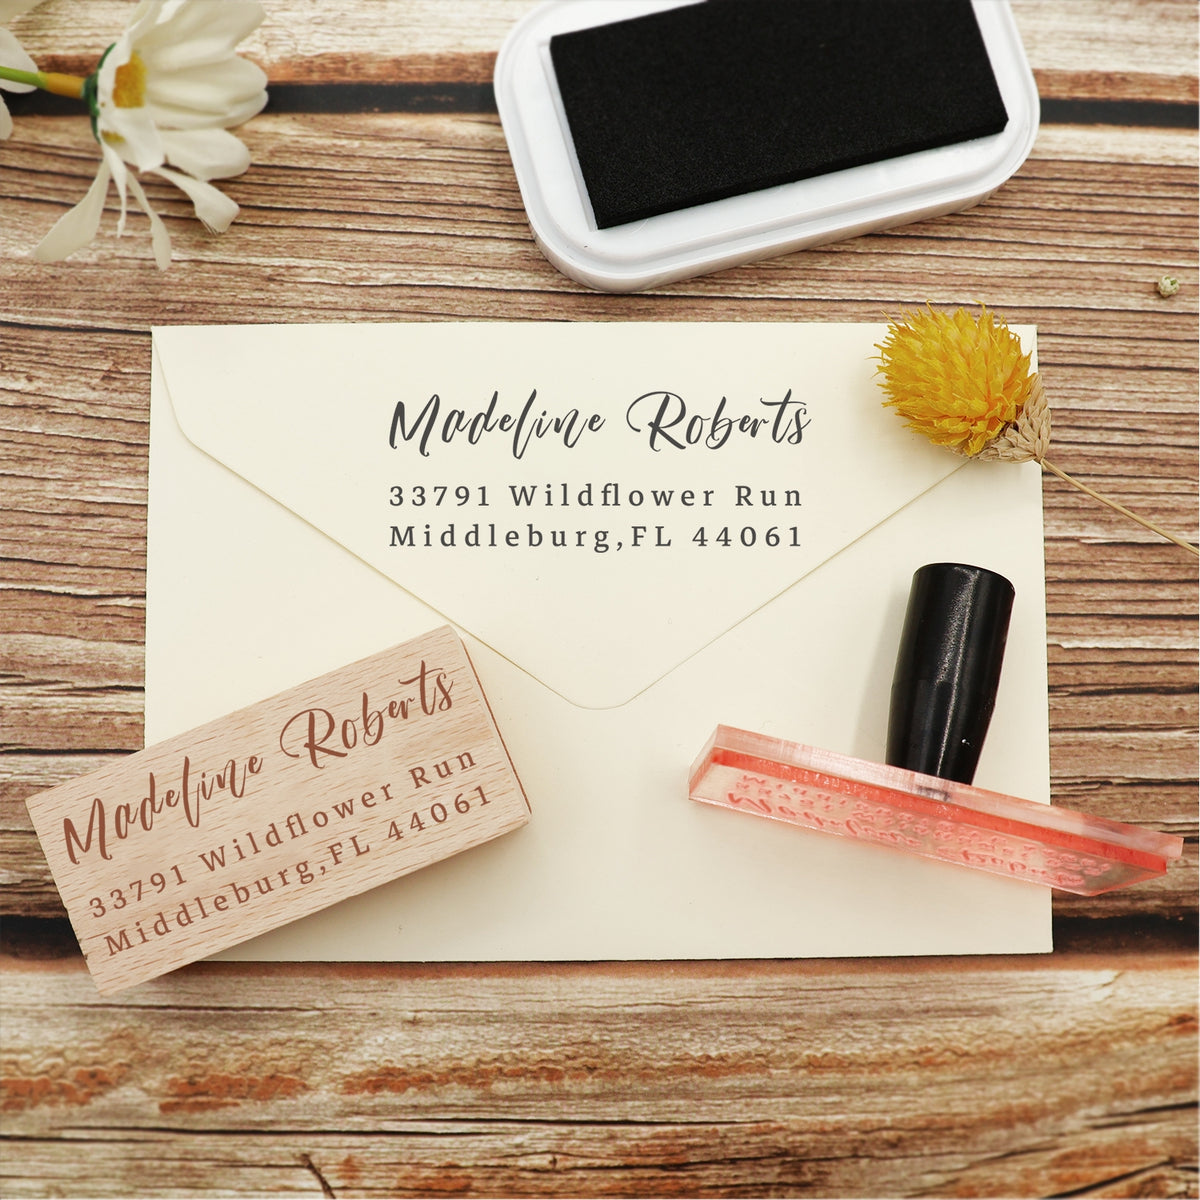 Custom Rubber Stamp Design designs, themes, templates and